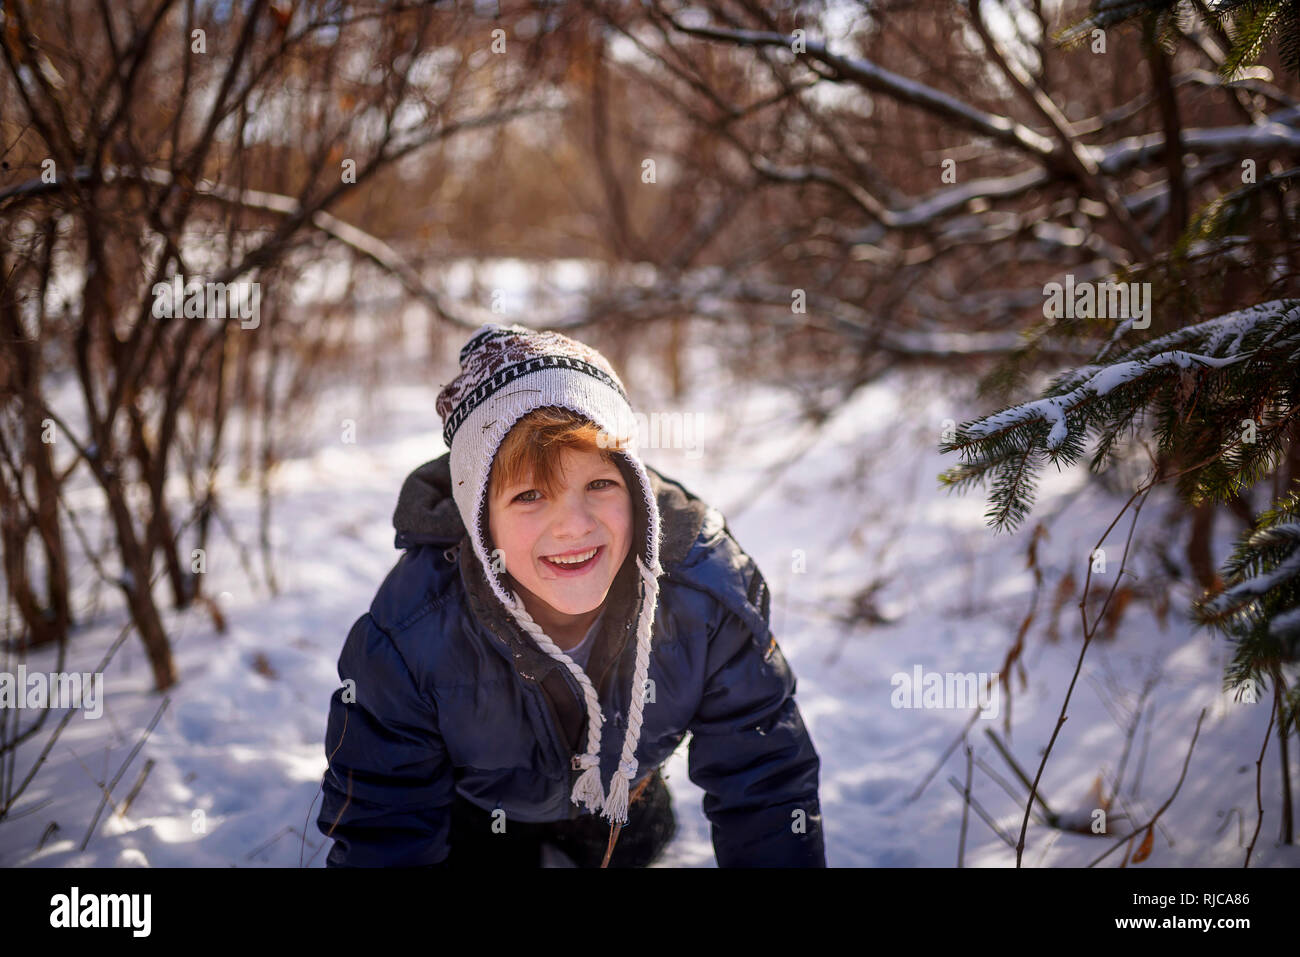 Boy crawling through the snow, Wisconsin, United States Stock Photo